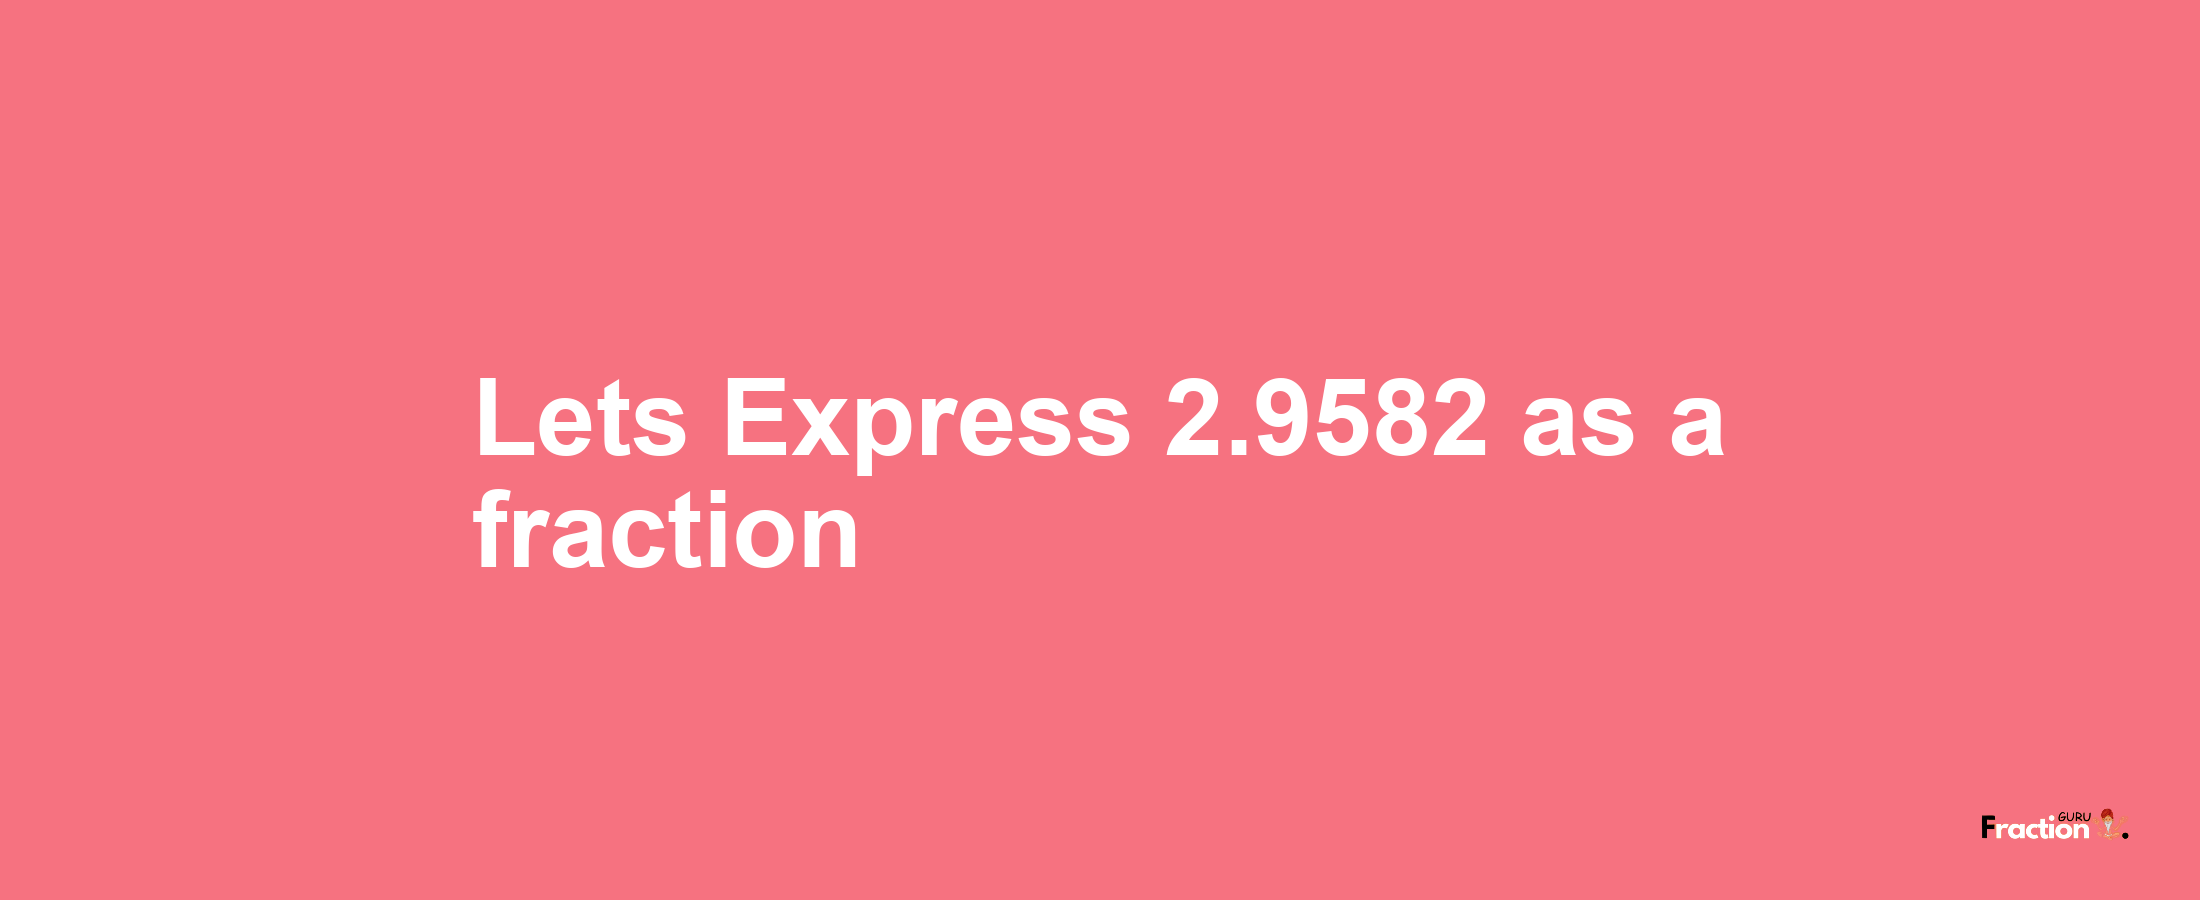 Lets Express 2.9582 as afraction